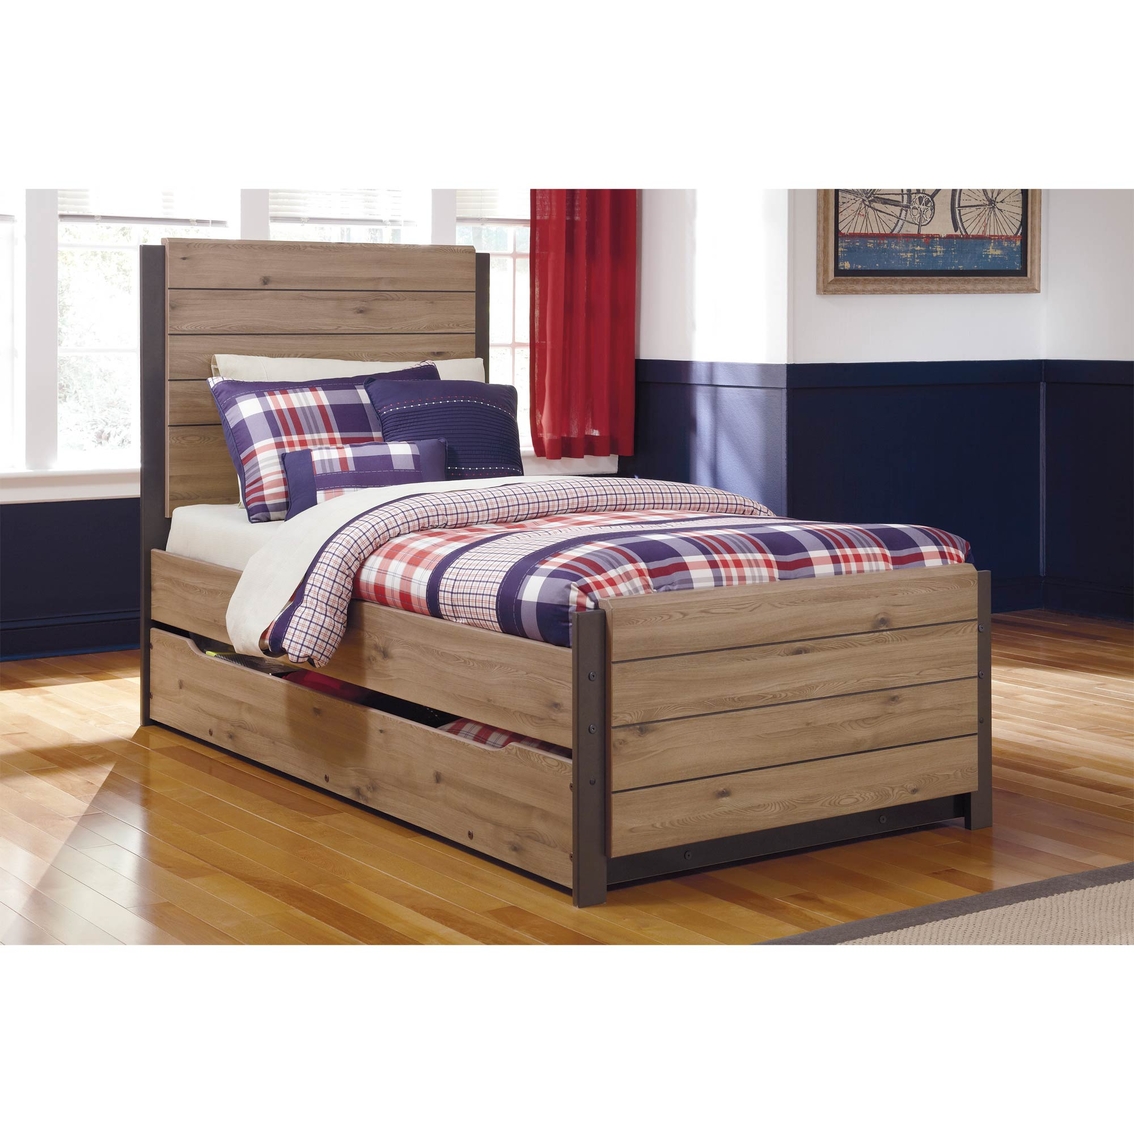 Ashley Dexfield Panel Trundle Bed - Image 2 of 2